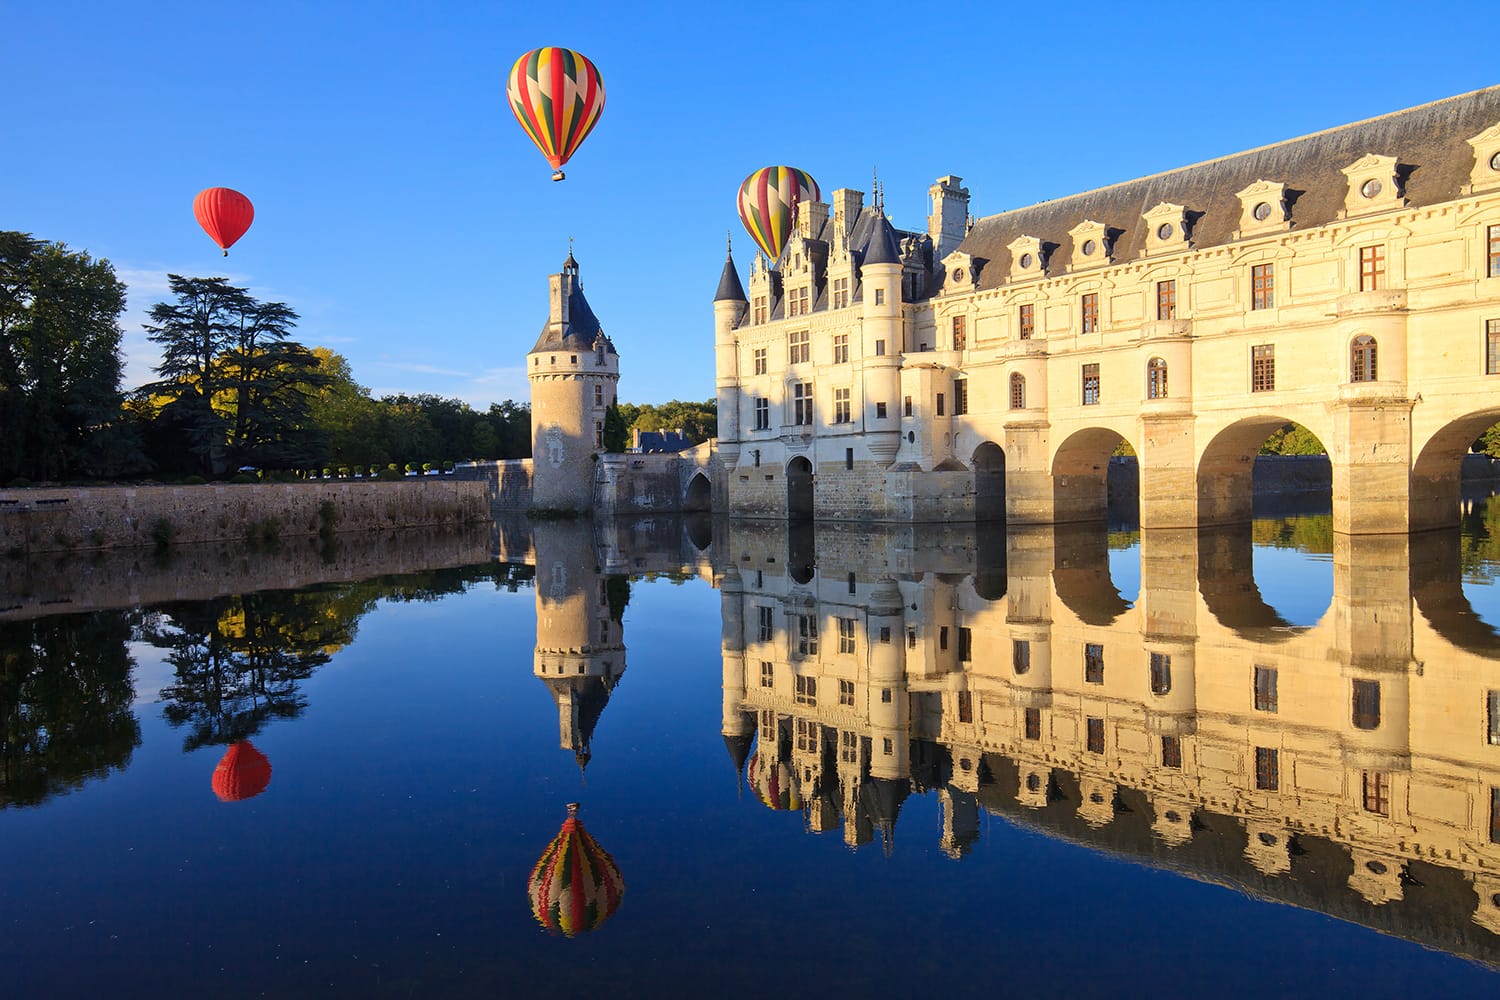 Hot air balloons over Chateau de Chenonceau in the Loire Valley, France